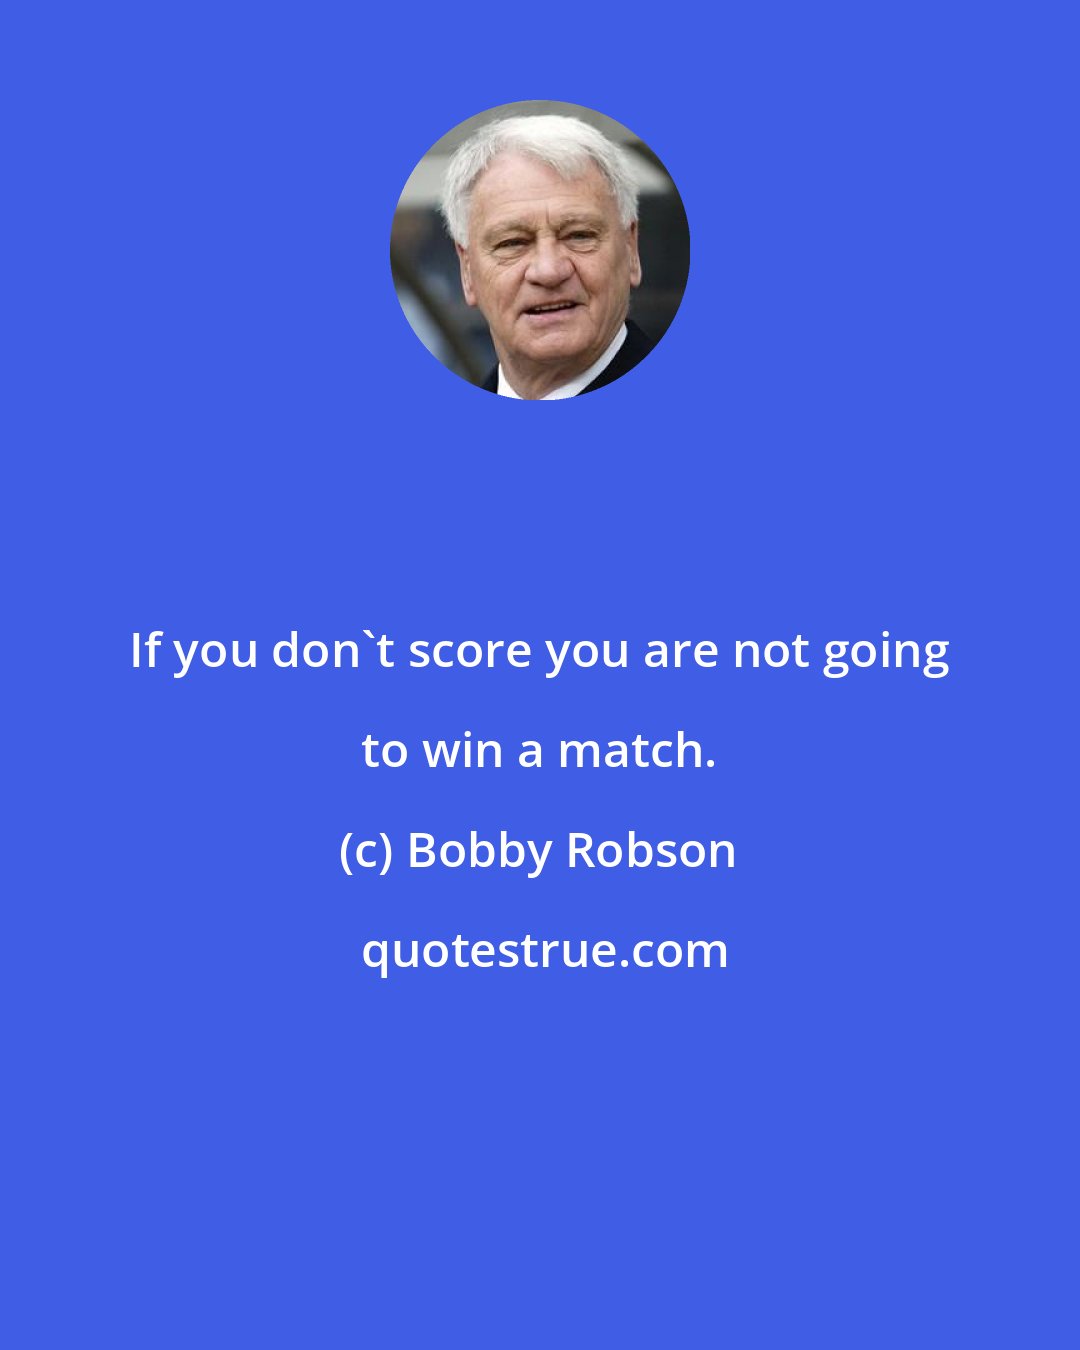 Bobby Robson: If you don't score you are not going to win a match.